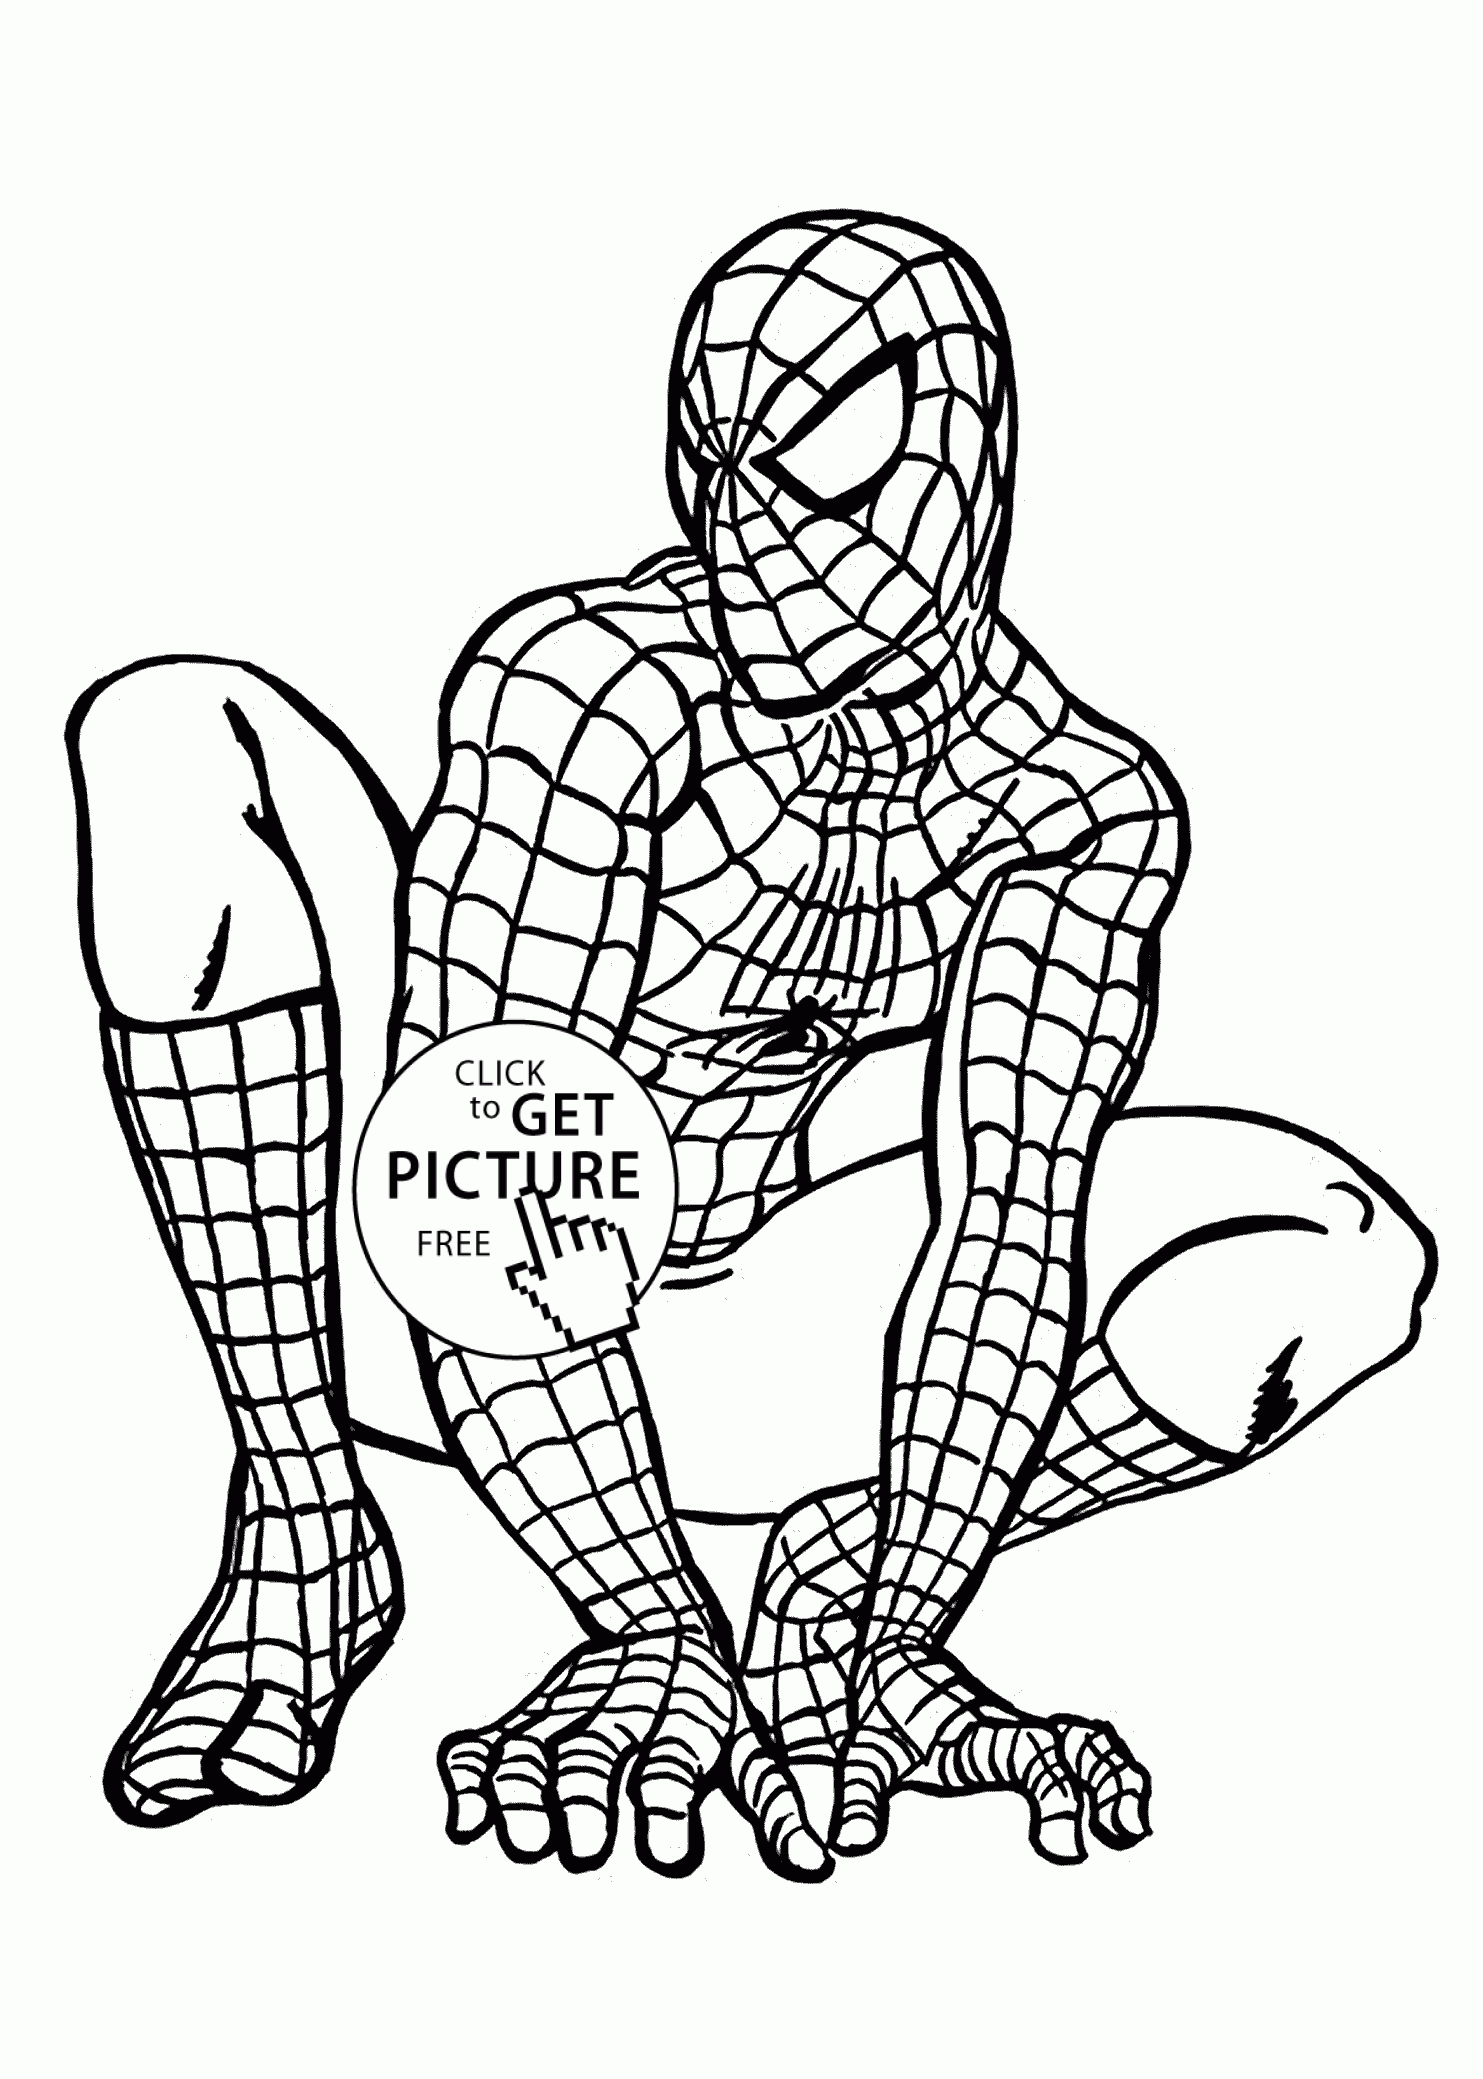 Coloring Pages : 46 Fantastic Spider Man Coloring Sheets Lego Spiderman  Coloring Sheets‚ Iron Spiderman Coloring Sheets Printable‚ Spiderman  Coloring Sheets For Kids To Print Out also Coloring Pagess